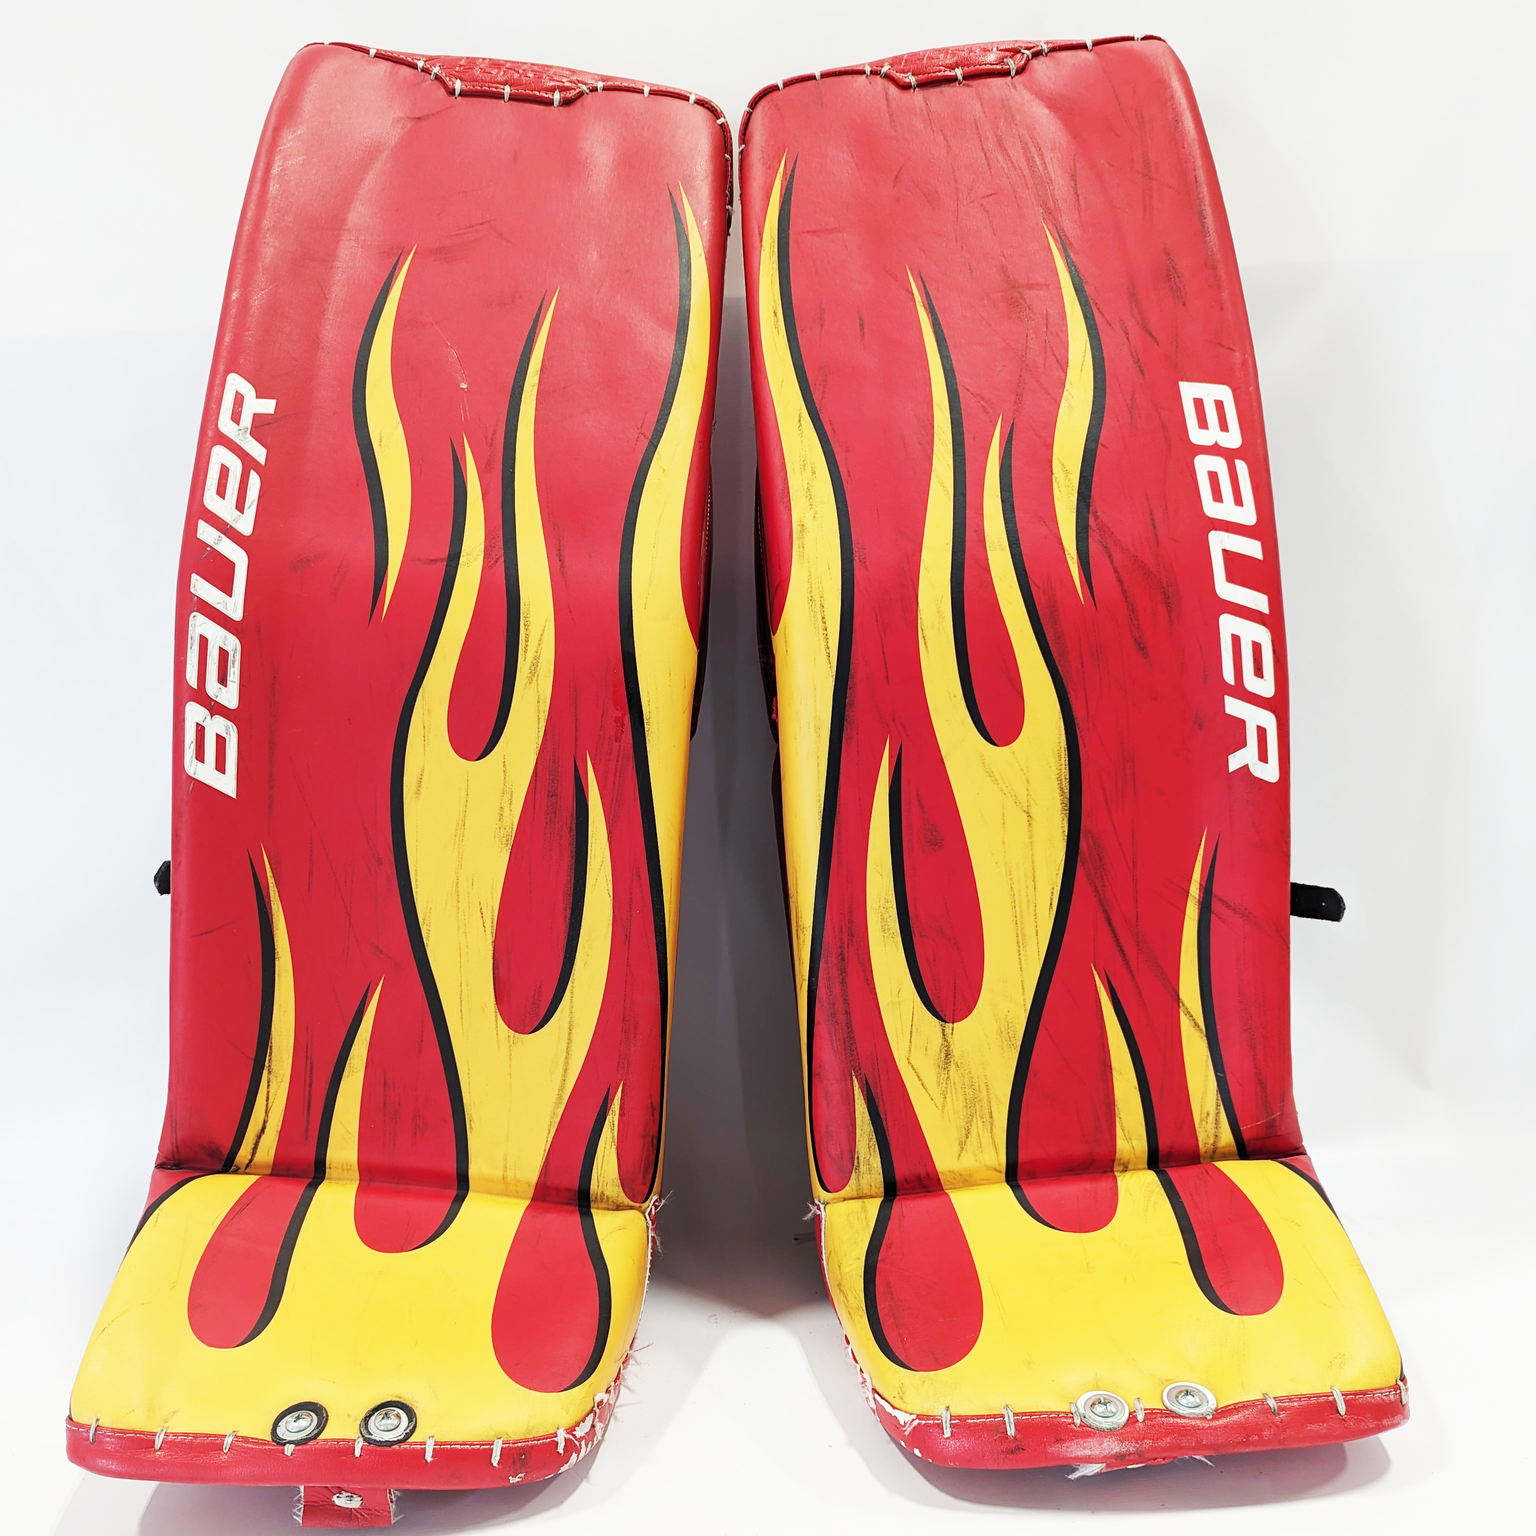 Used 36+" Bauer Supreme Ultrasonic Goalie Leg Pads Pro Stock (Red/Yellow Flames)